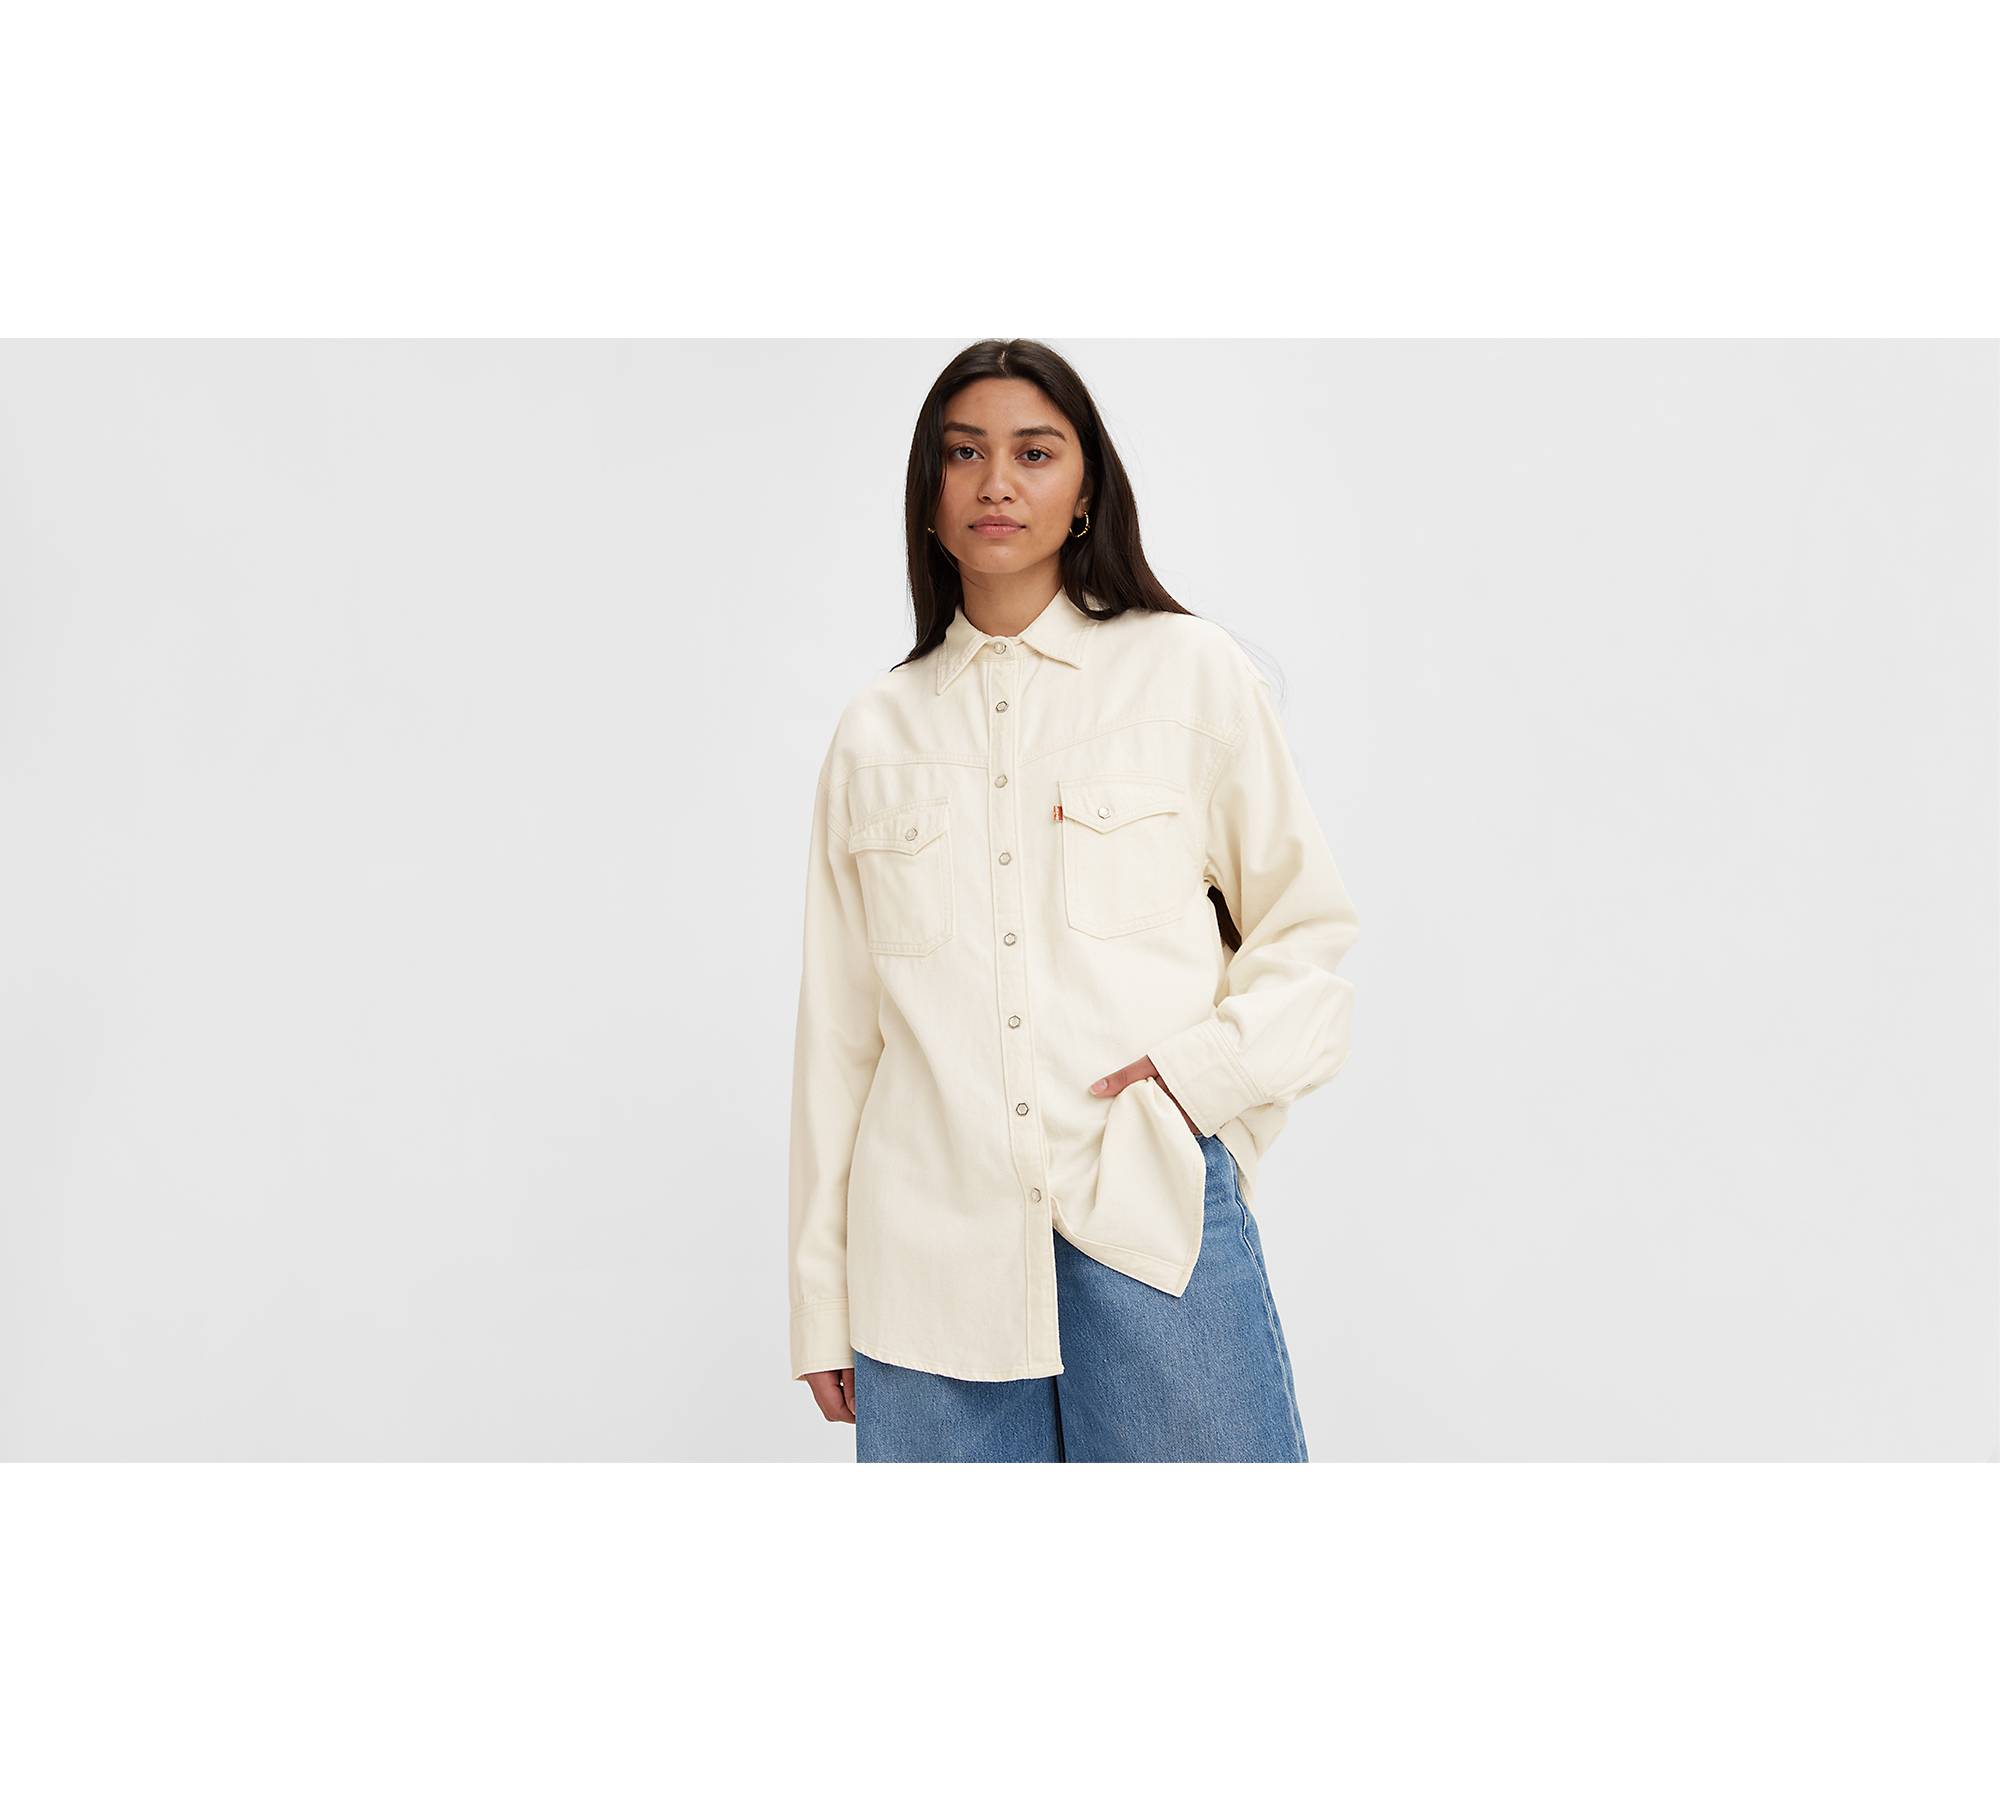  Tunic Blouse Western Tops for Women Undershirt for